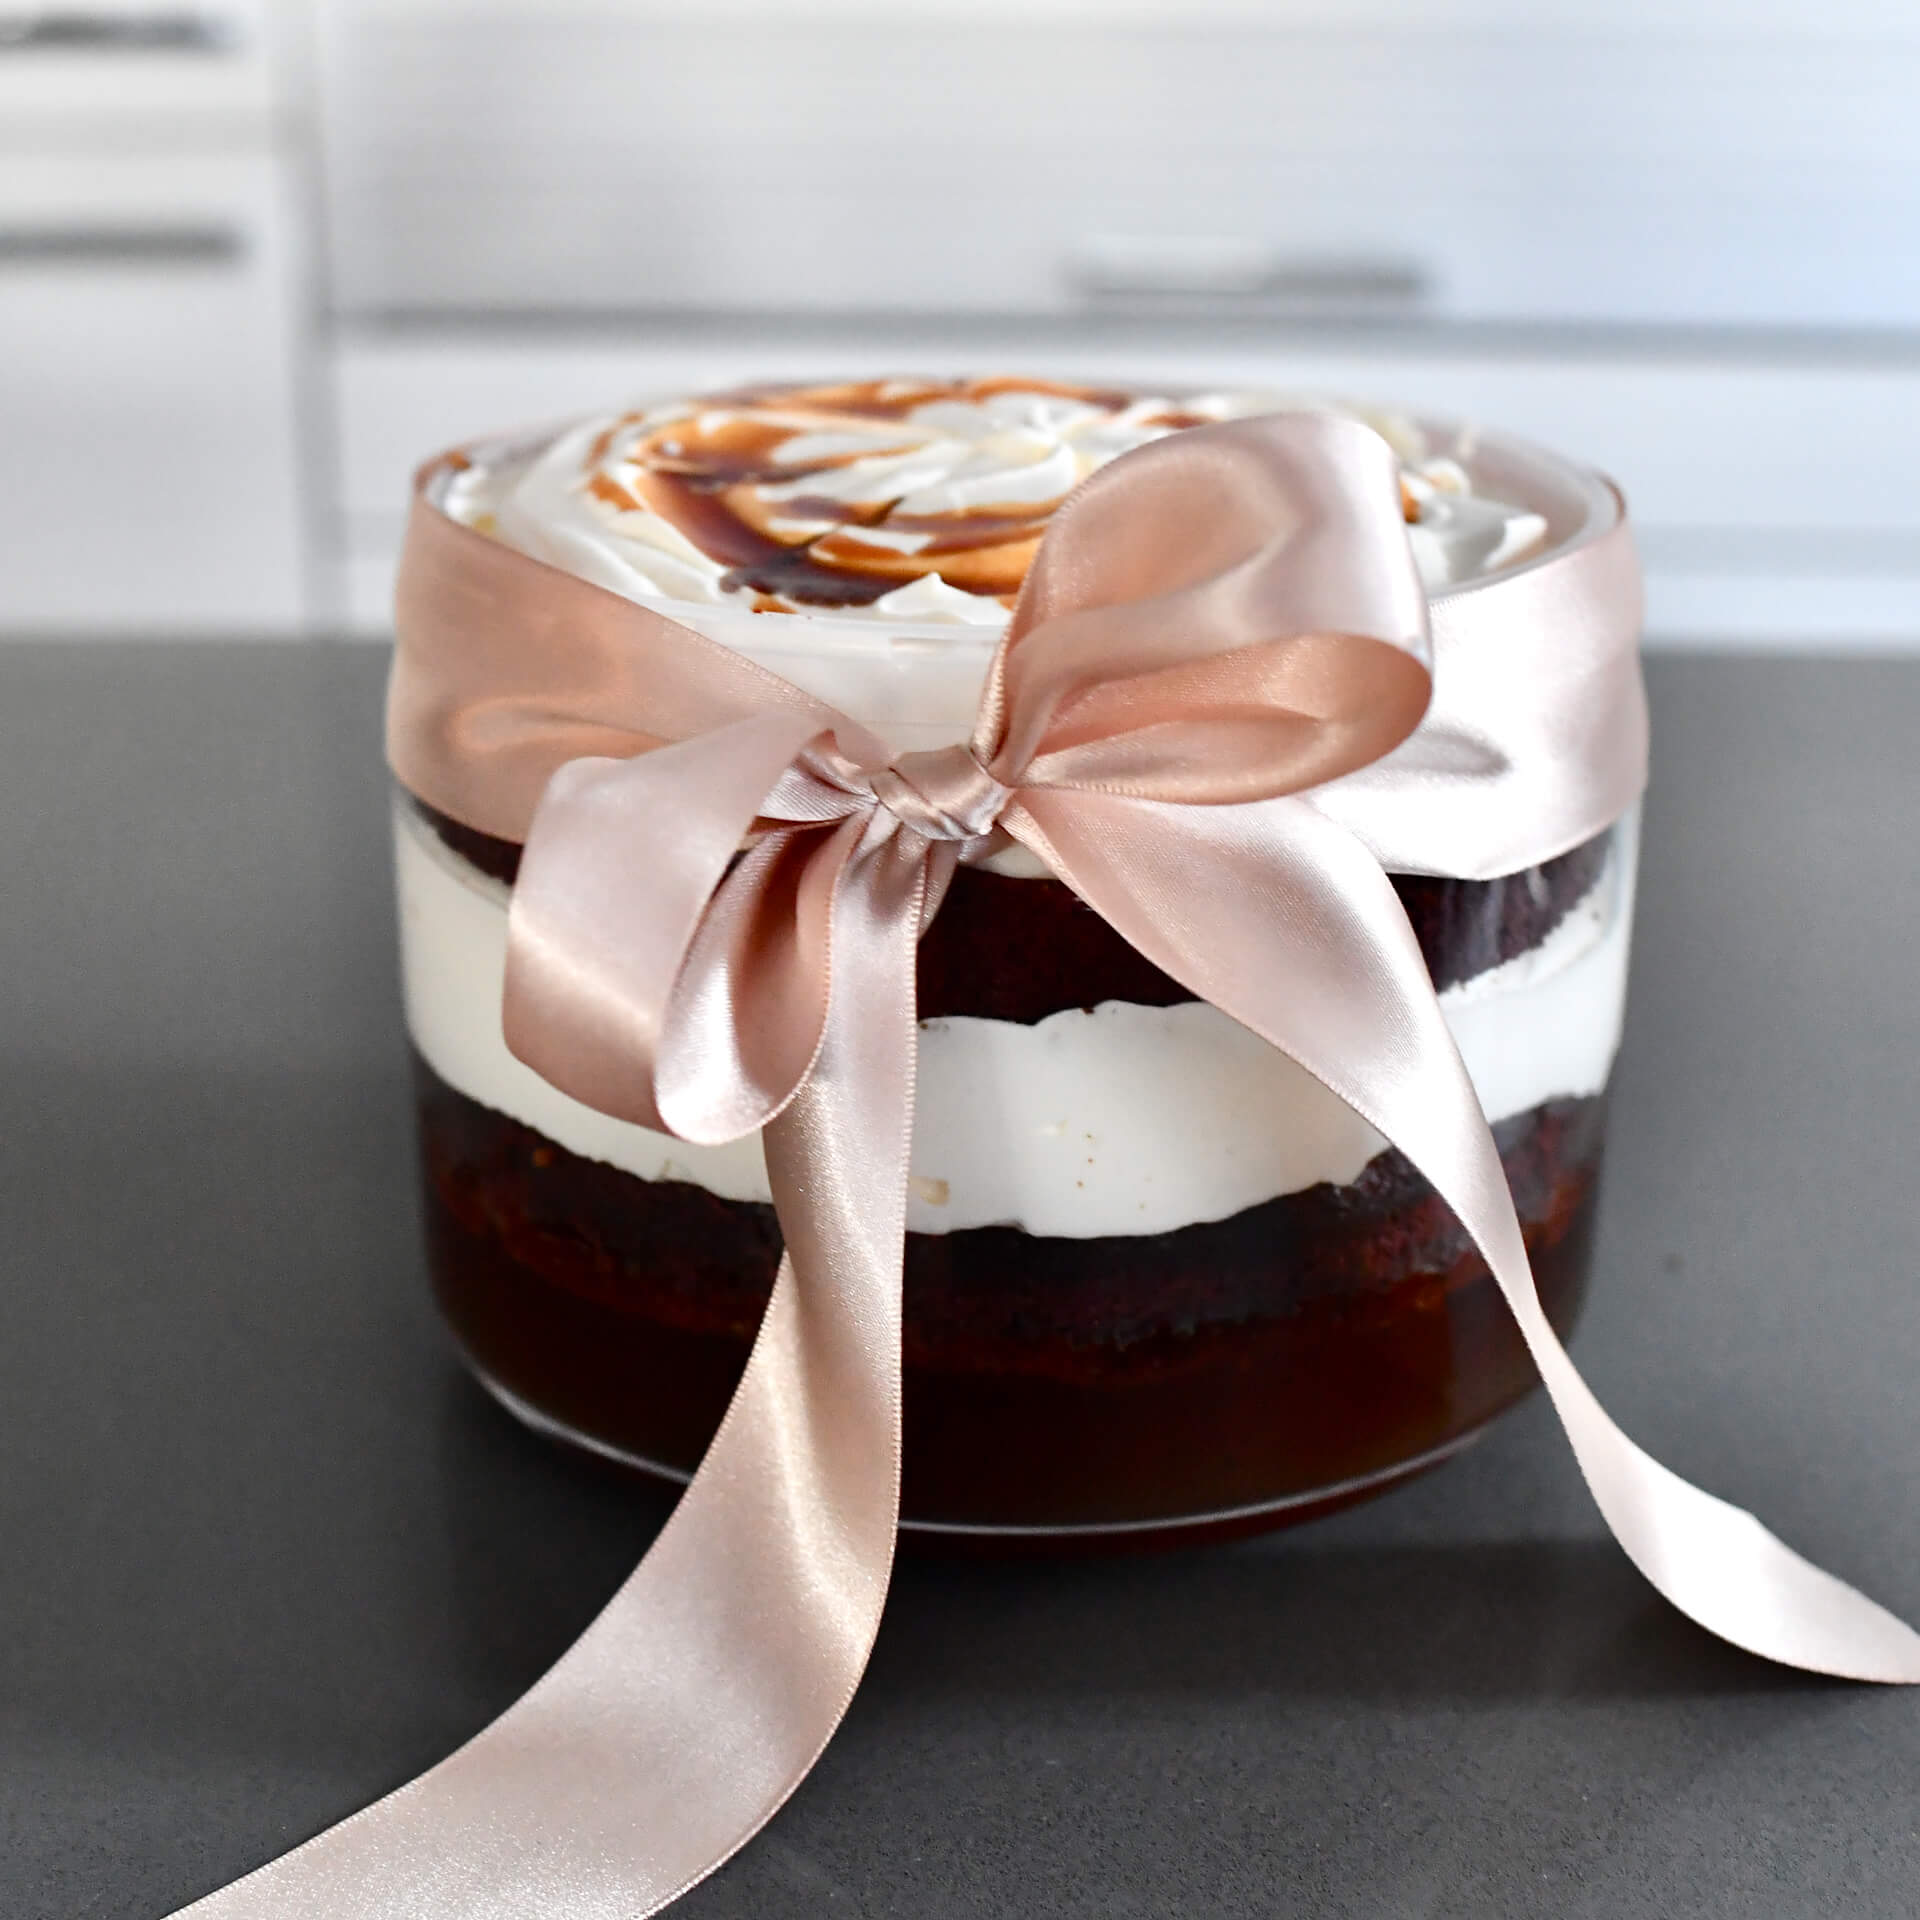 Gingerbread, Sherry and Caramel Trifle